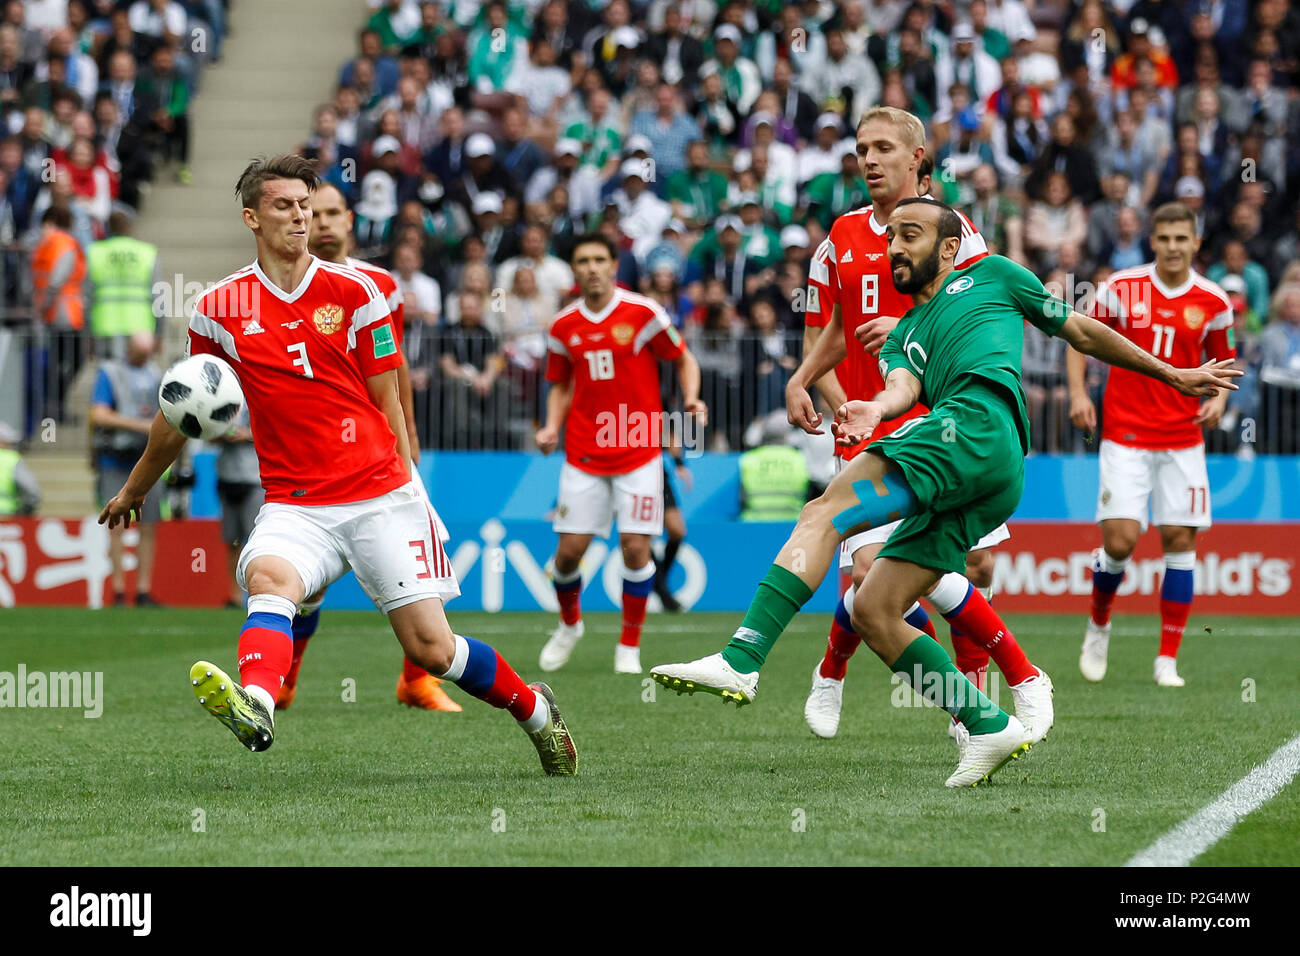 Moscow, Russia. 14th June 2018. Mohammad Al-Sahlawi of Saudi Arabia has a shot on goal during the 2018 FIFA World Cup Group A match between Russia and Saudi Arabia at Luzhniki Stadium on June 14th 2018 in Moscow, Russia. Credit: PHC Images/Alamy Live News Stock Photo